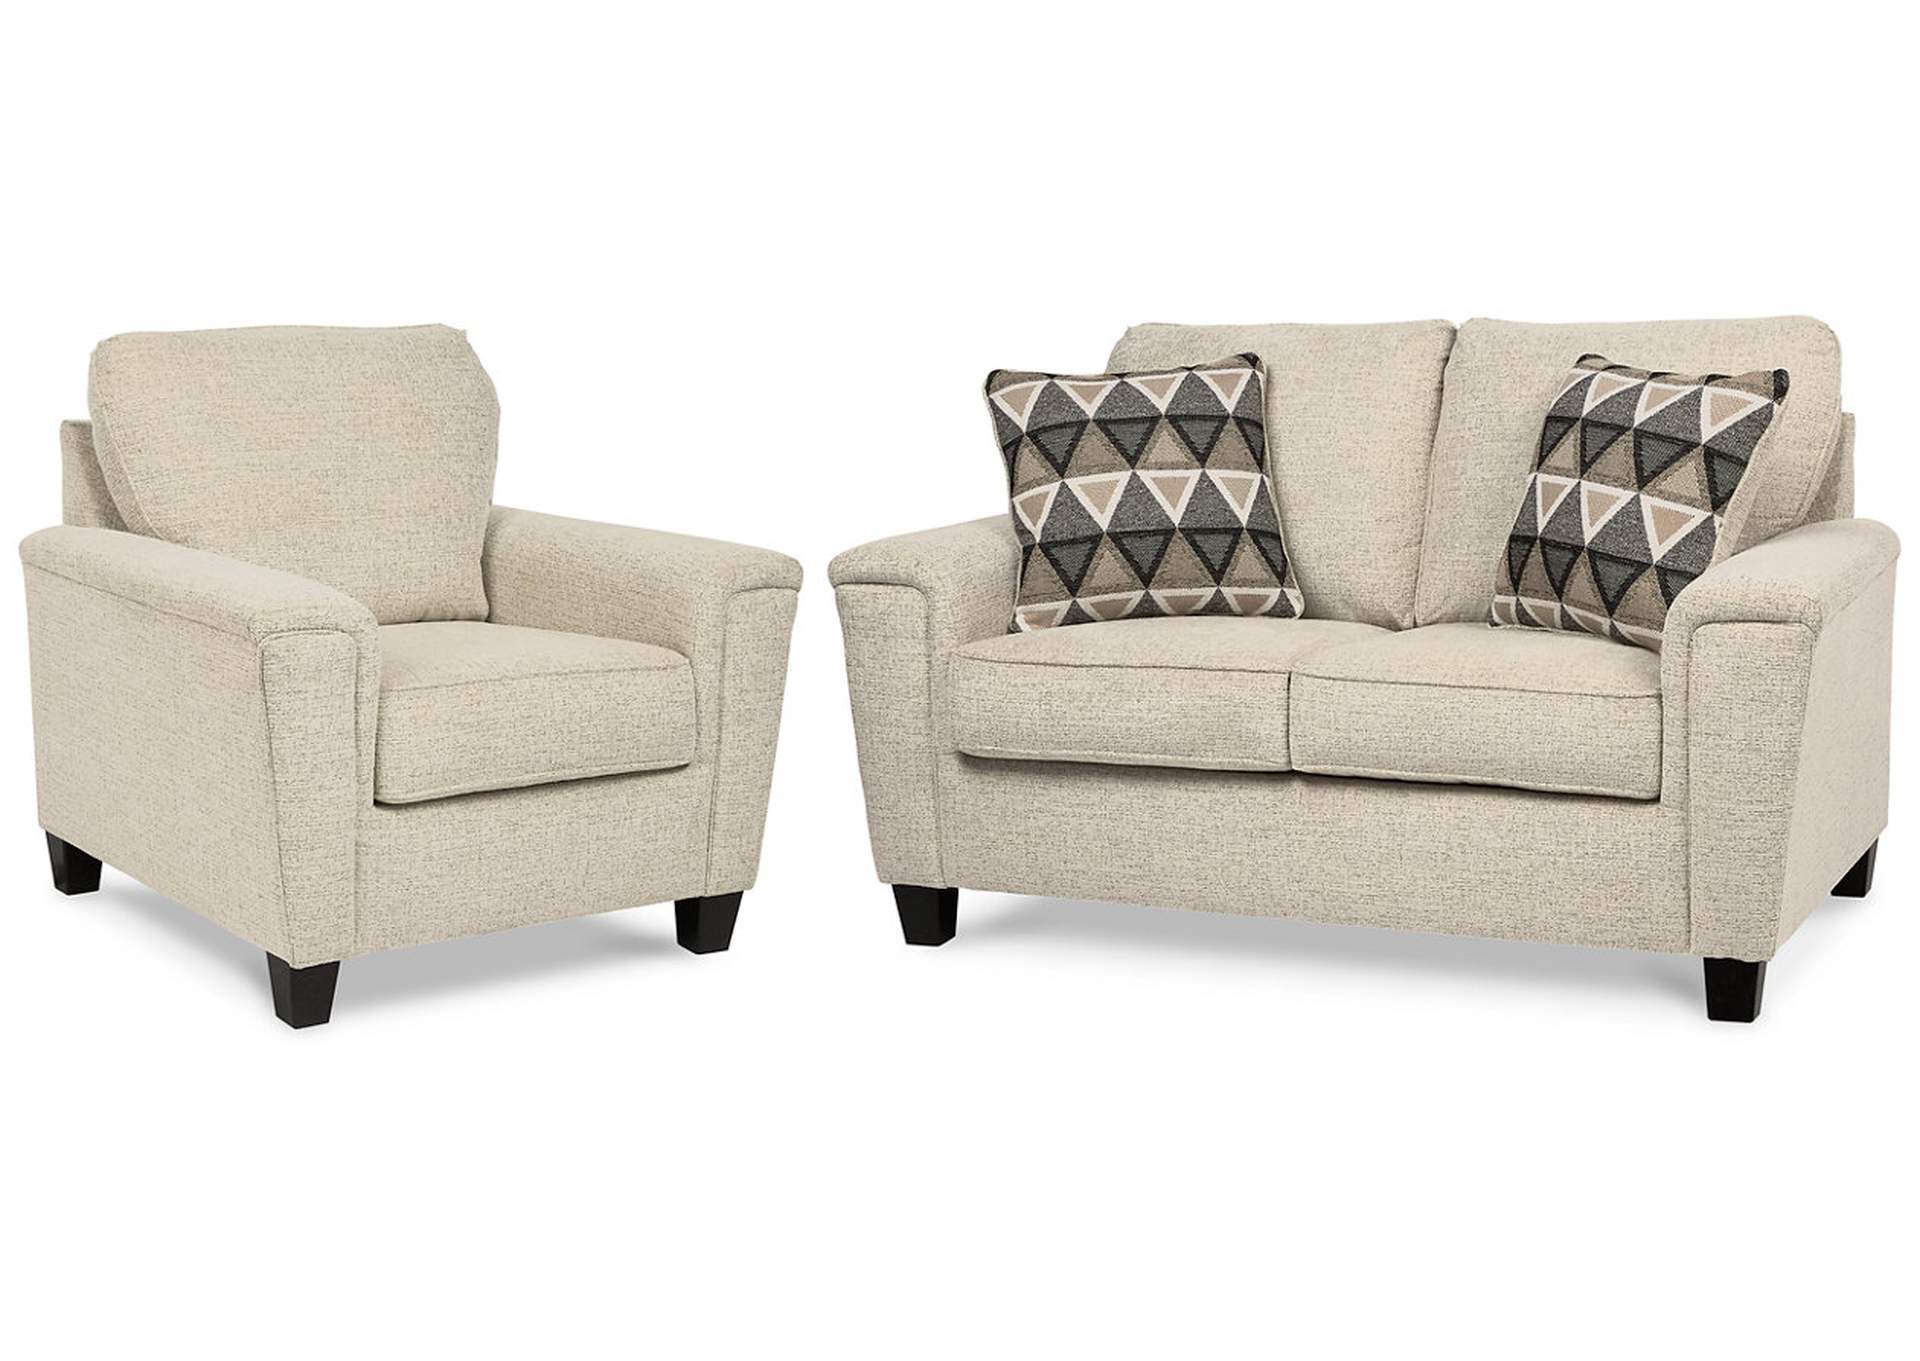 Abinger Loveseat and Chair,Signature Design By Ashley